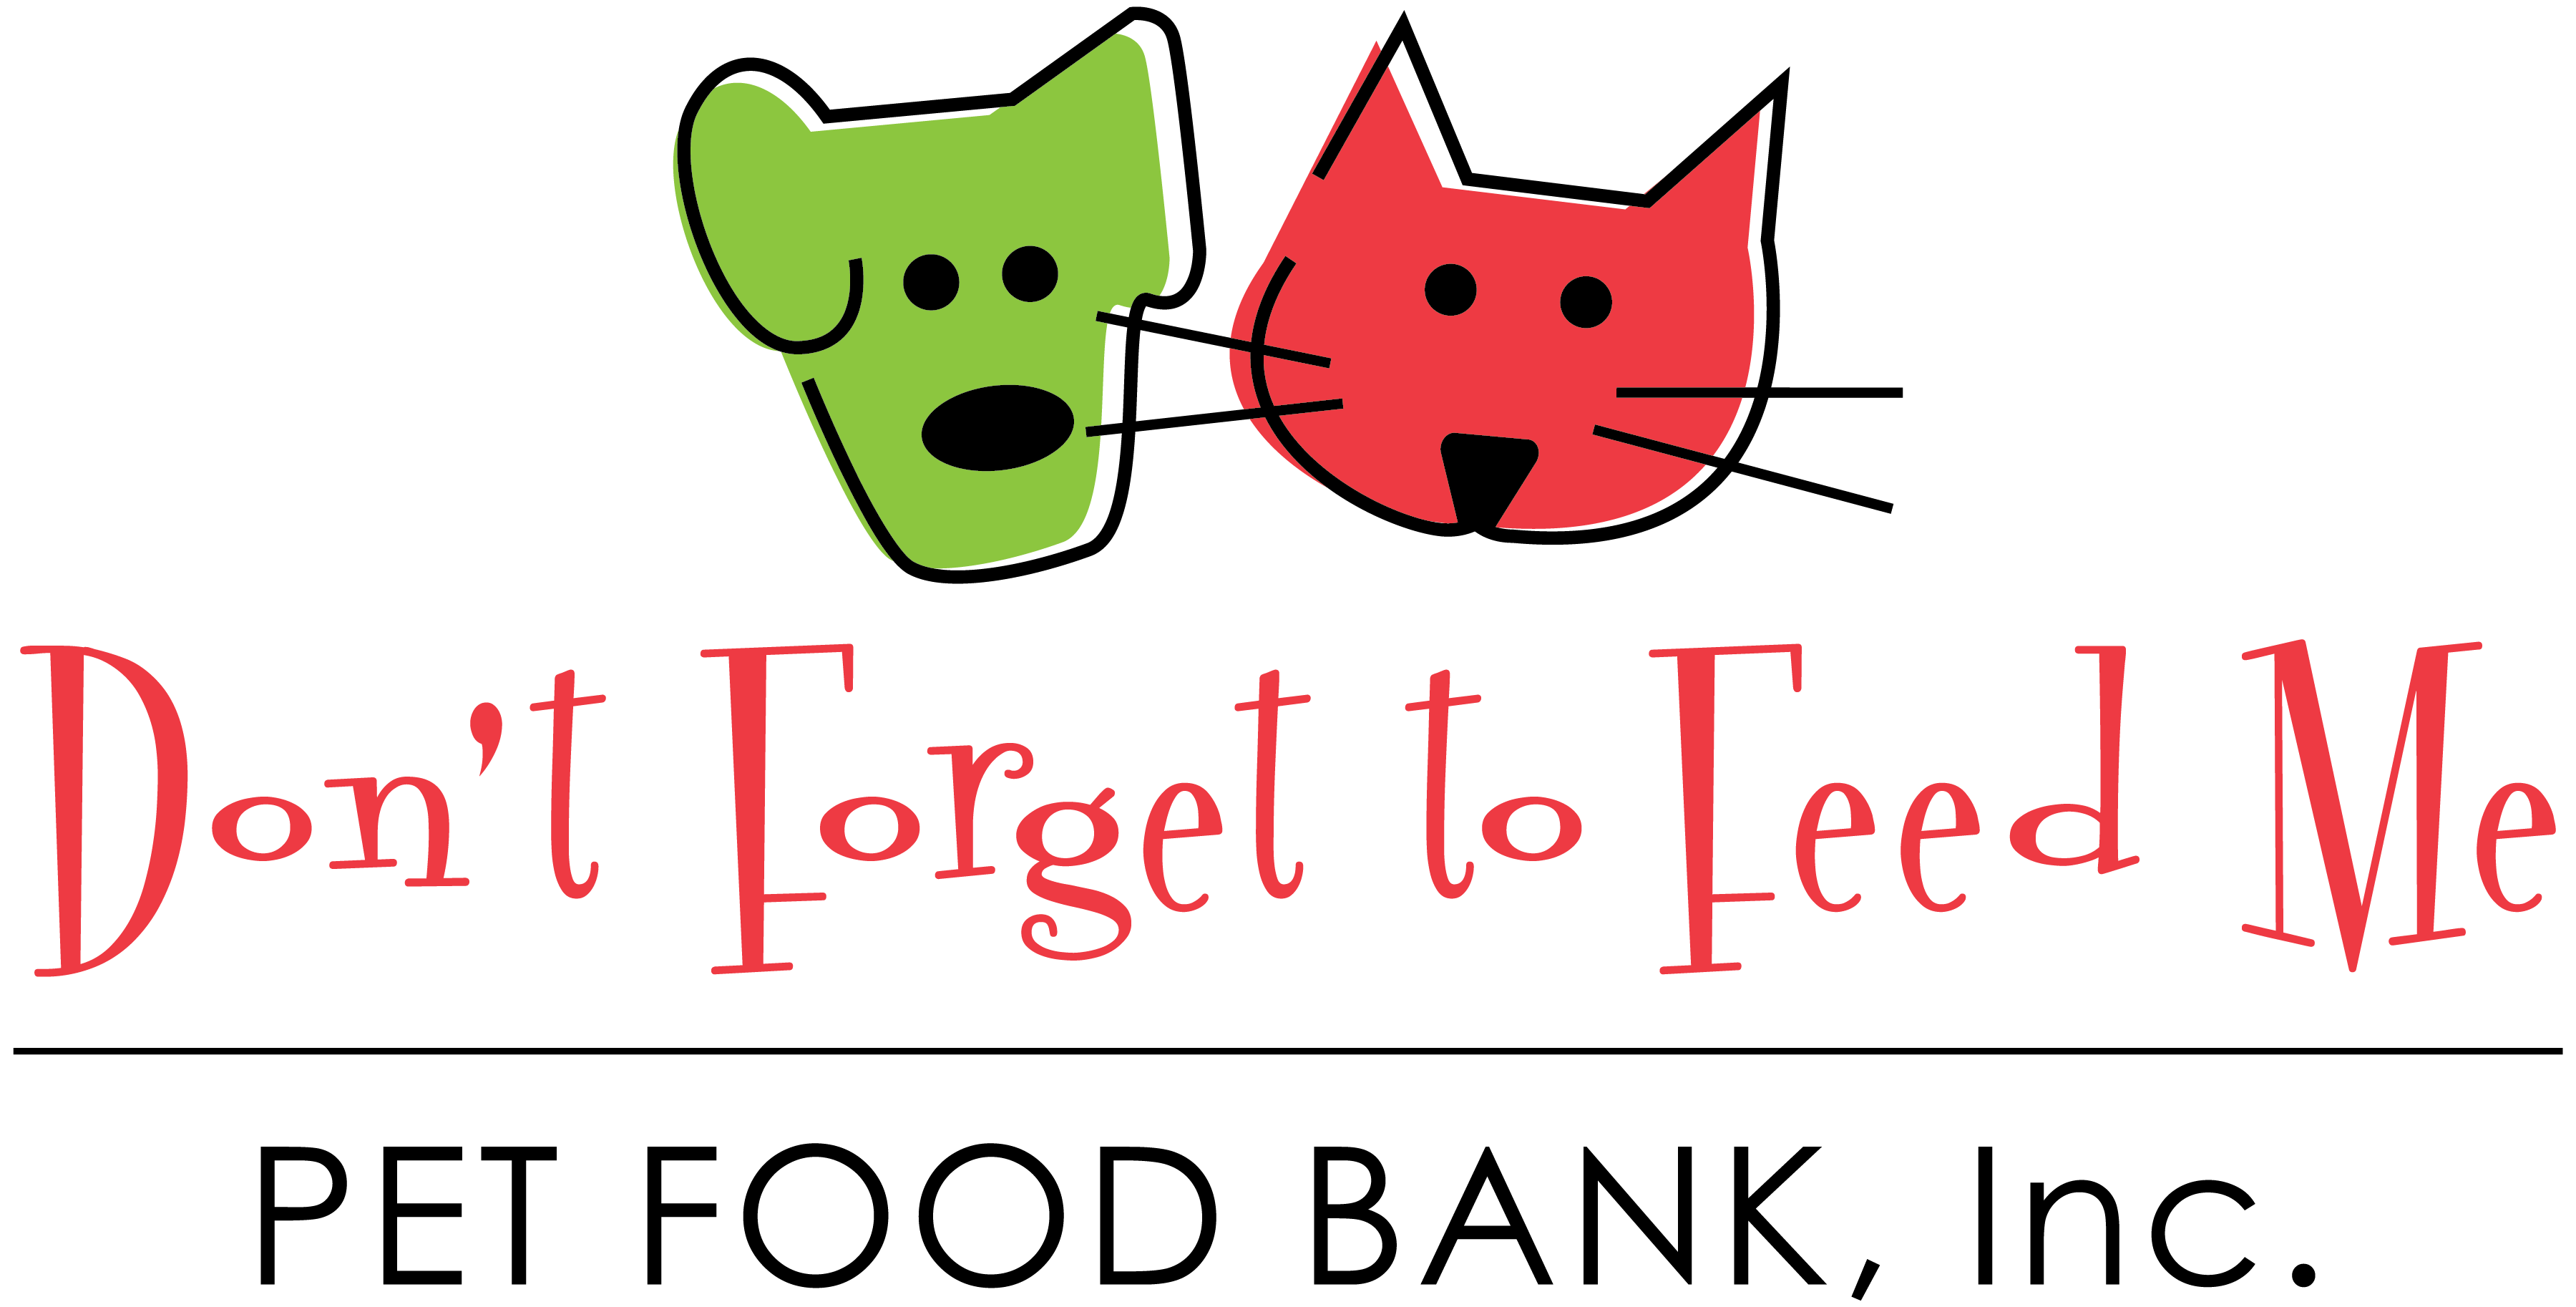 Don't Forget to Feed Me logo